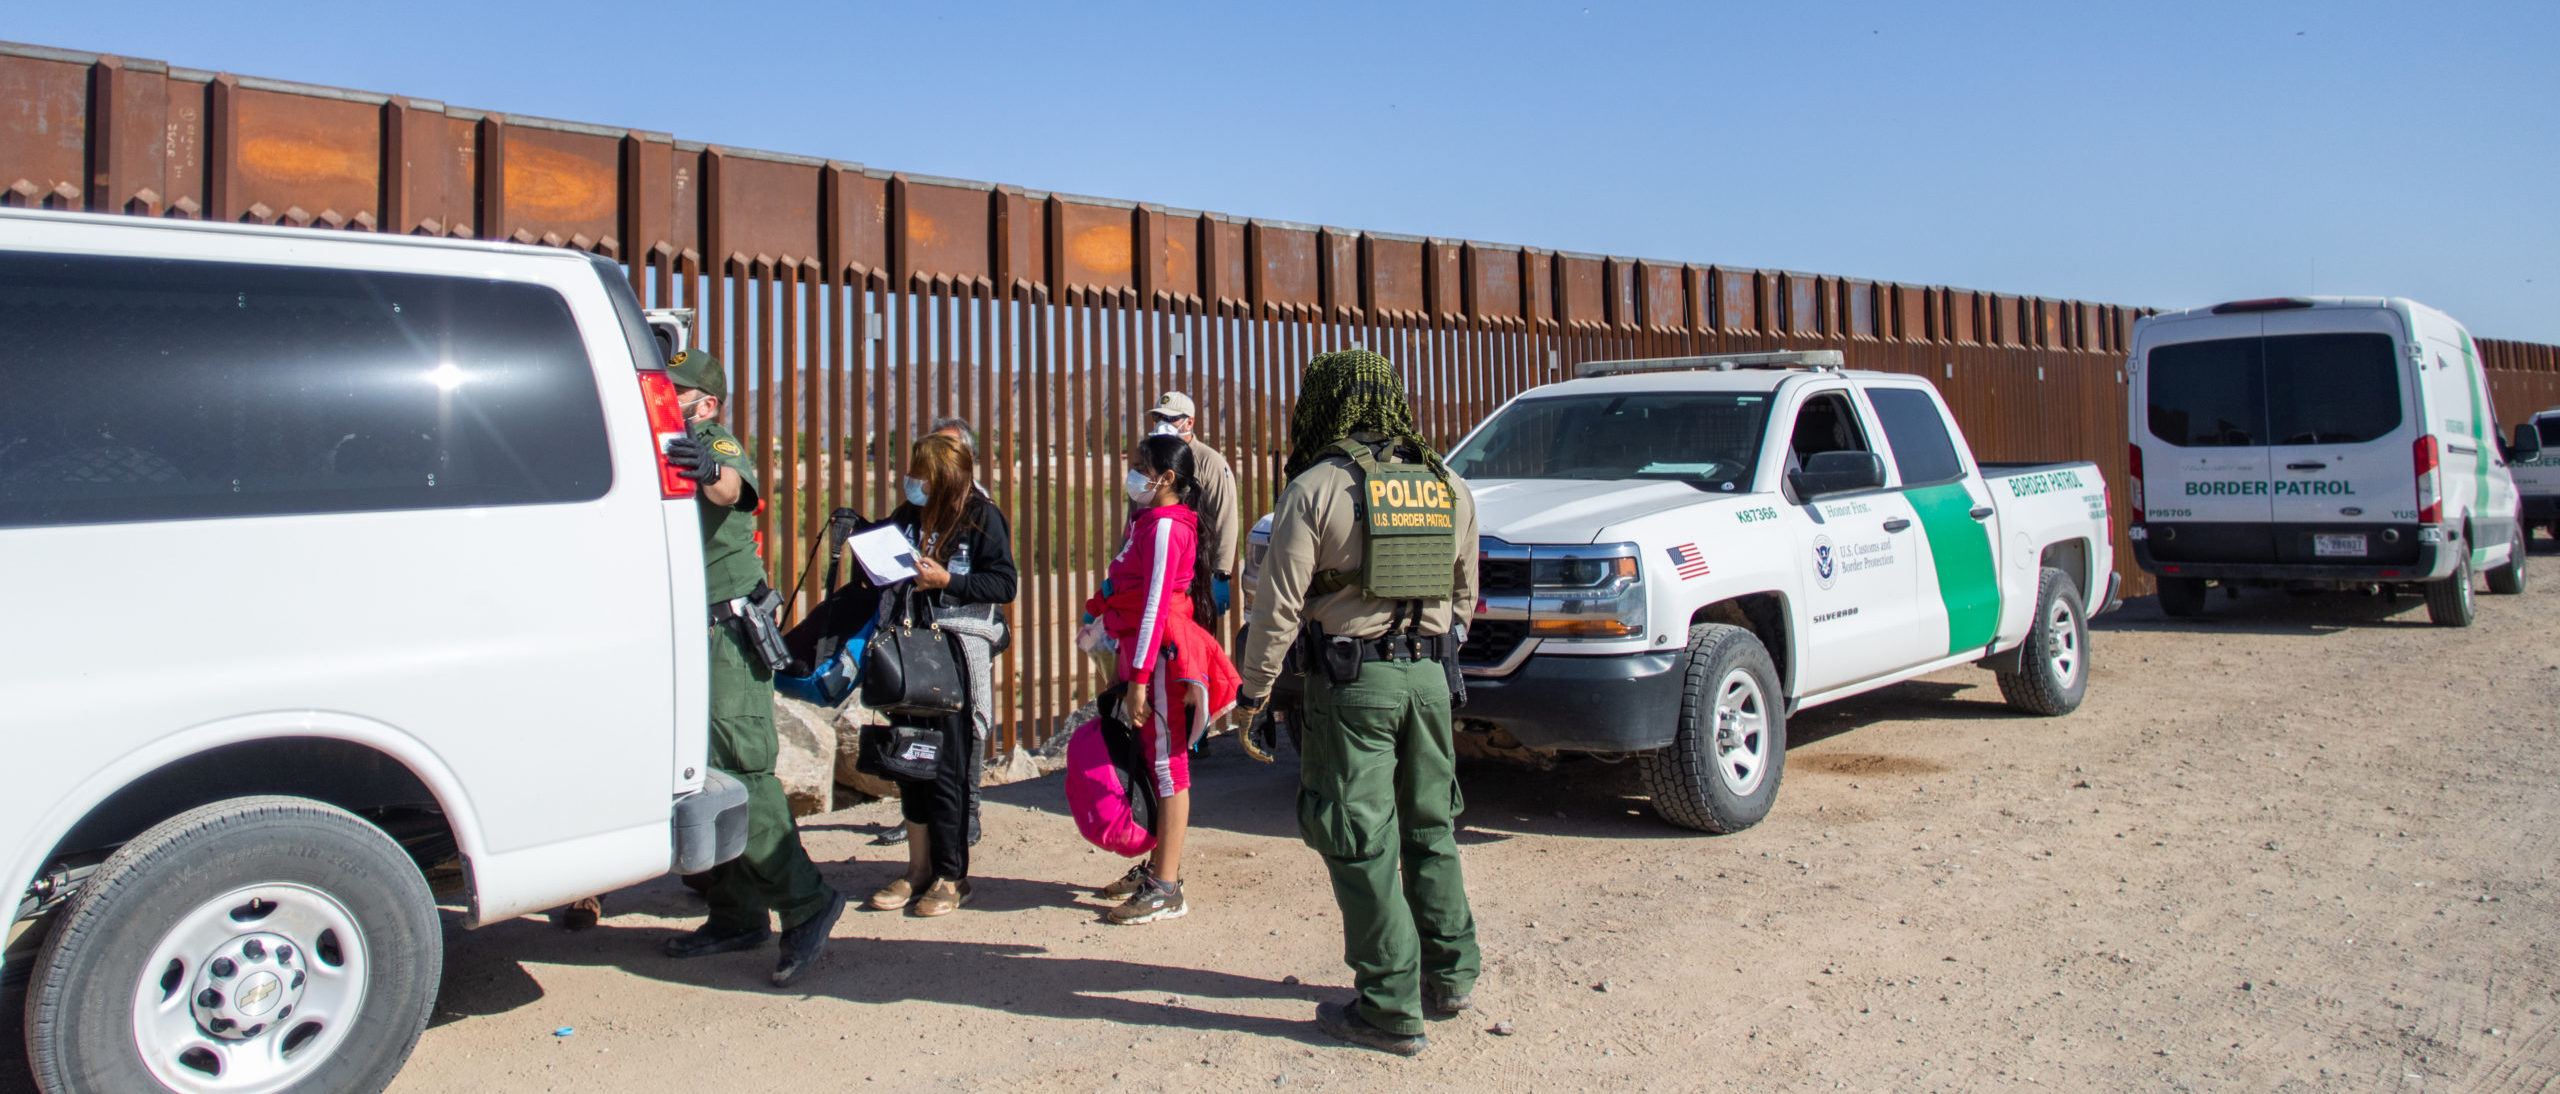 Migrant Encounters At The Border Have Nearly Doubled Since Biden Took Office